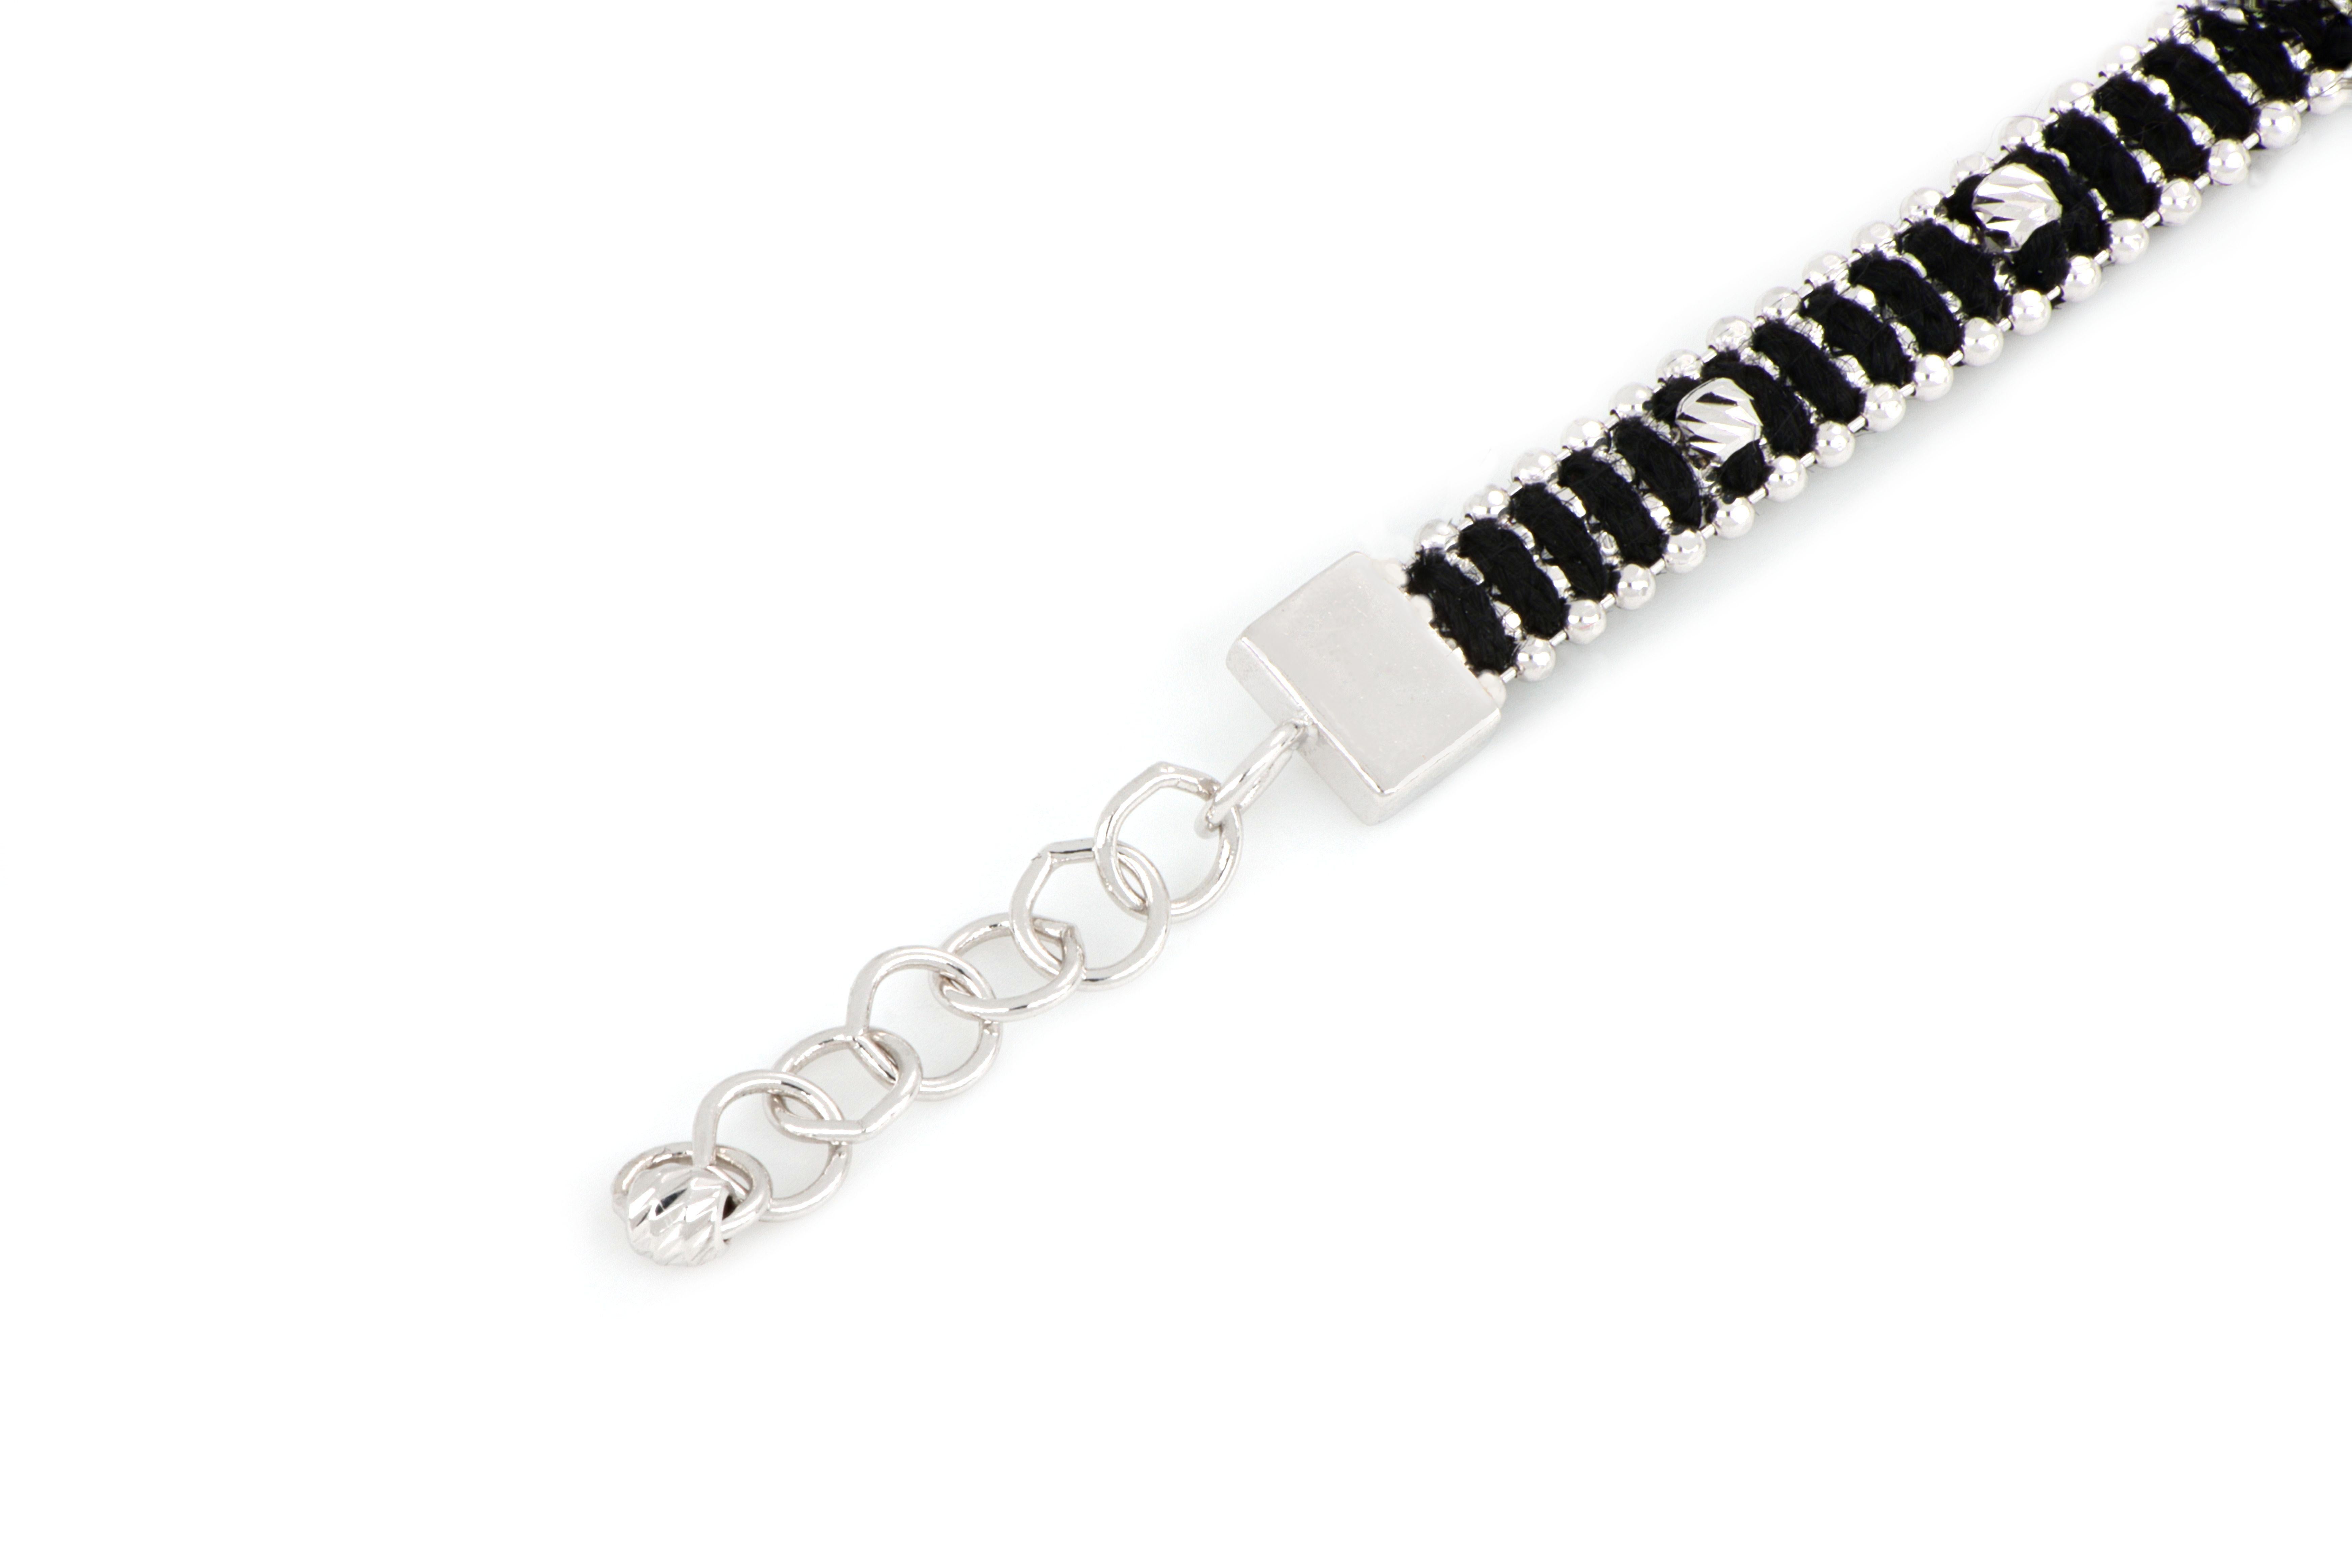 Treesure 18 Kt White Gold and Black Pure Silk Bracelet with Diamond Cutted Beads In New Condition For Sale In Nove, Veneto